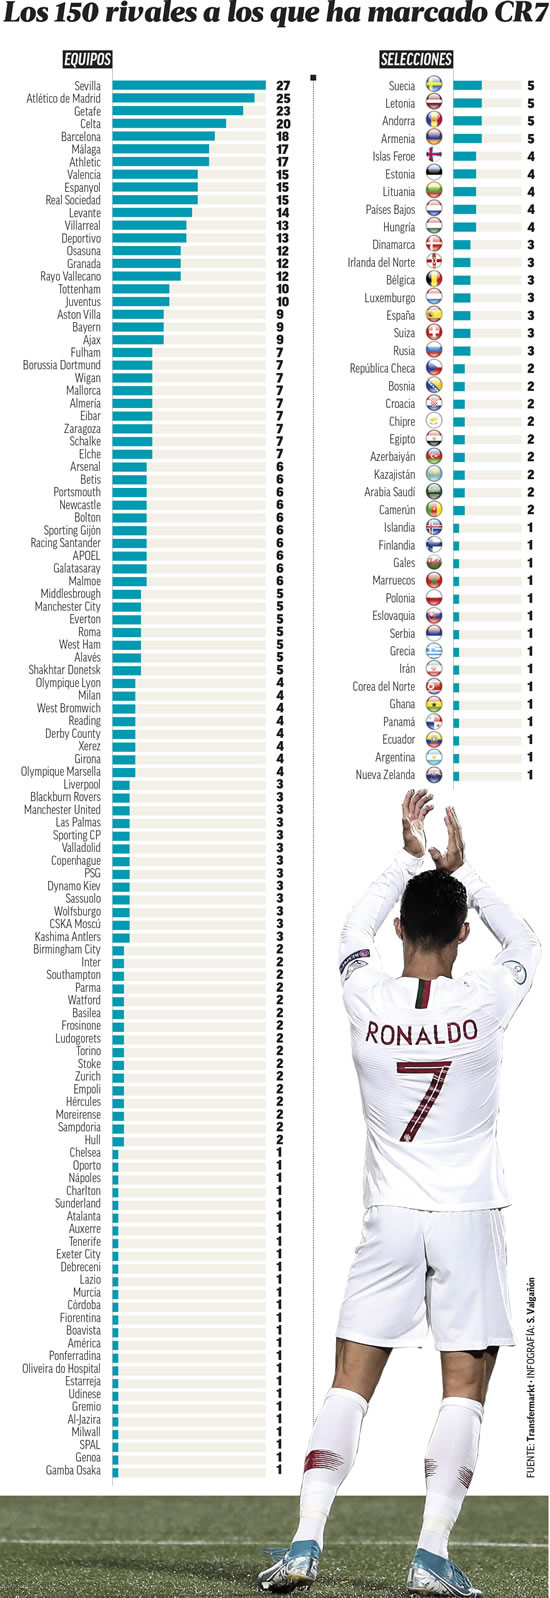 Cristiano Ronaldo adds to his collection: Scored against 150 different teams